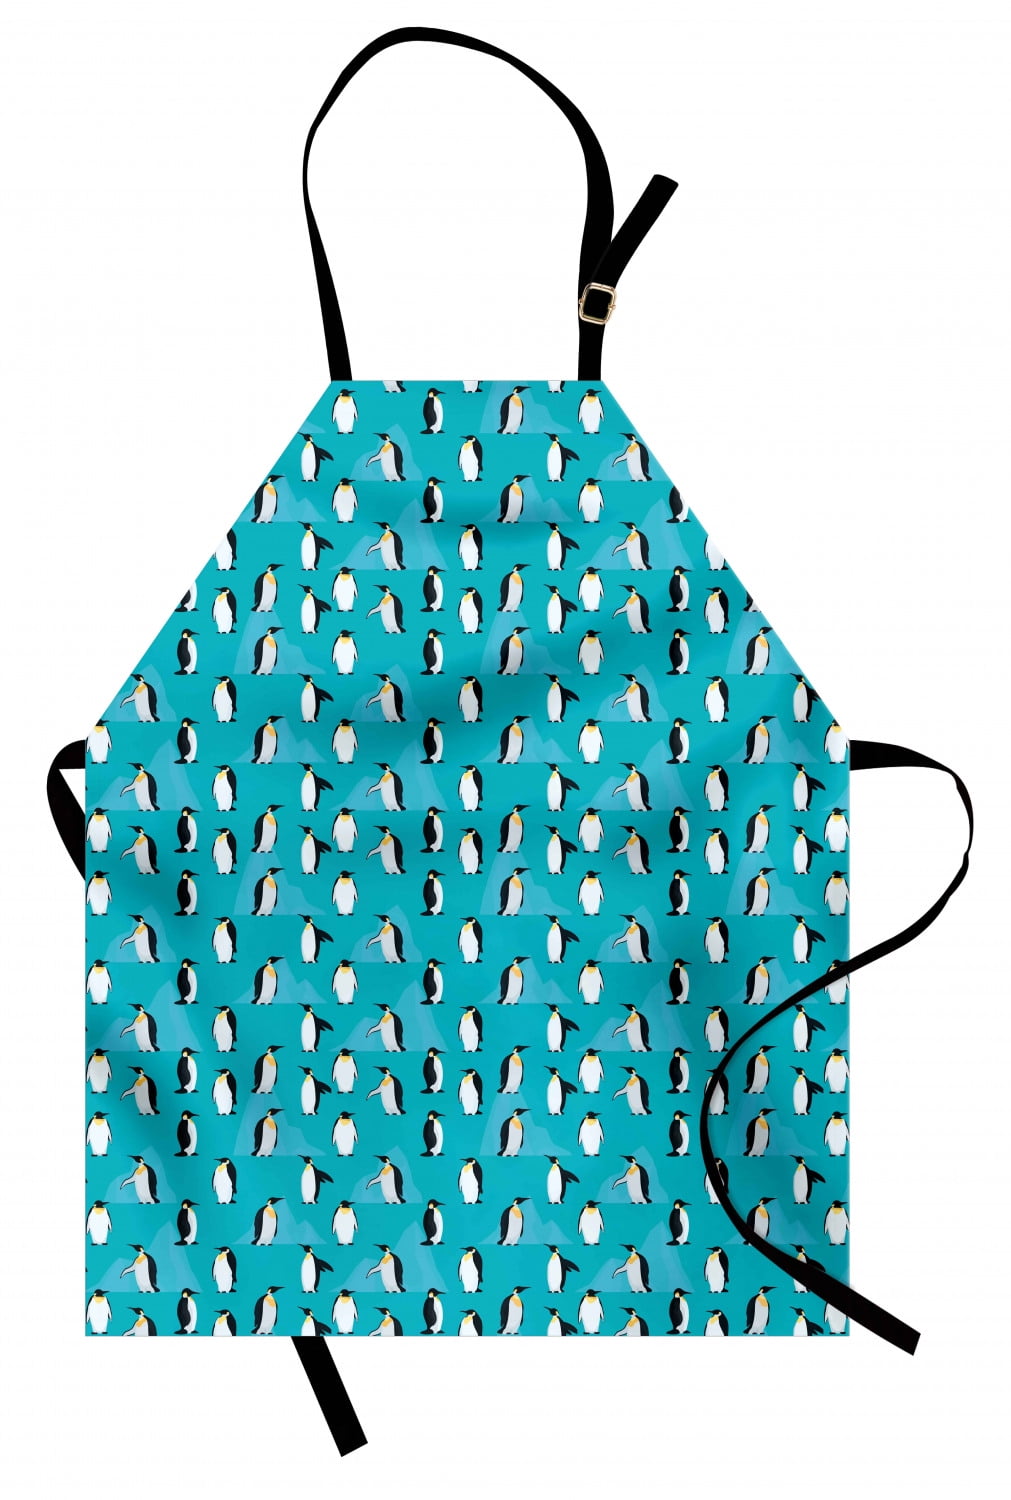 Kitchen Bib with Adjustable Neck Unisex Apron Adult Size by Ambesonne 